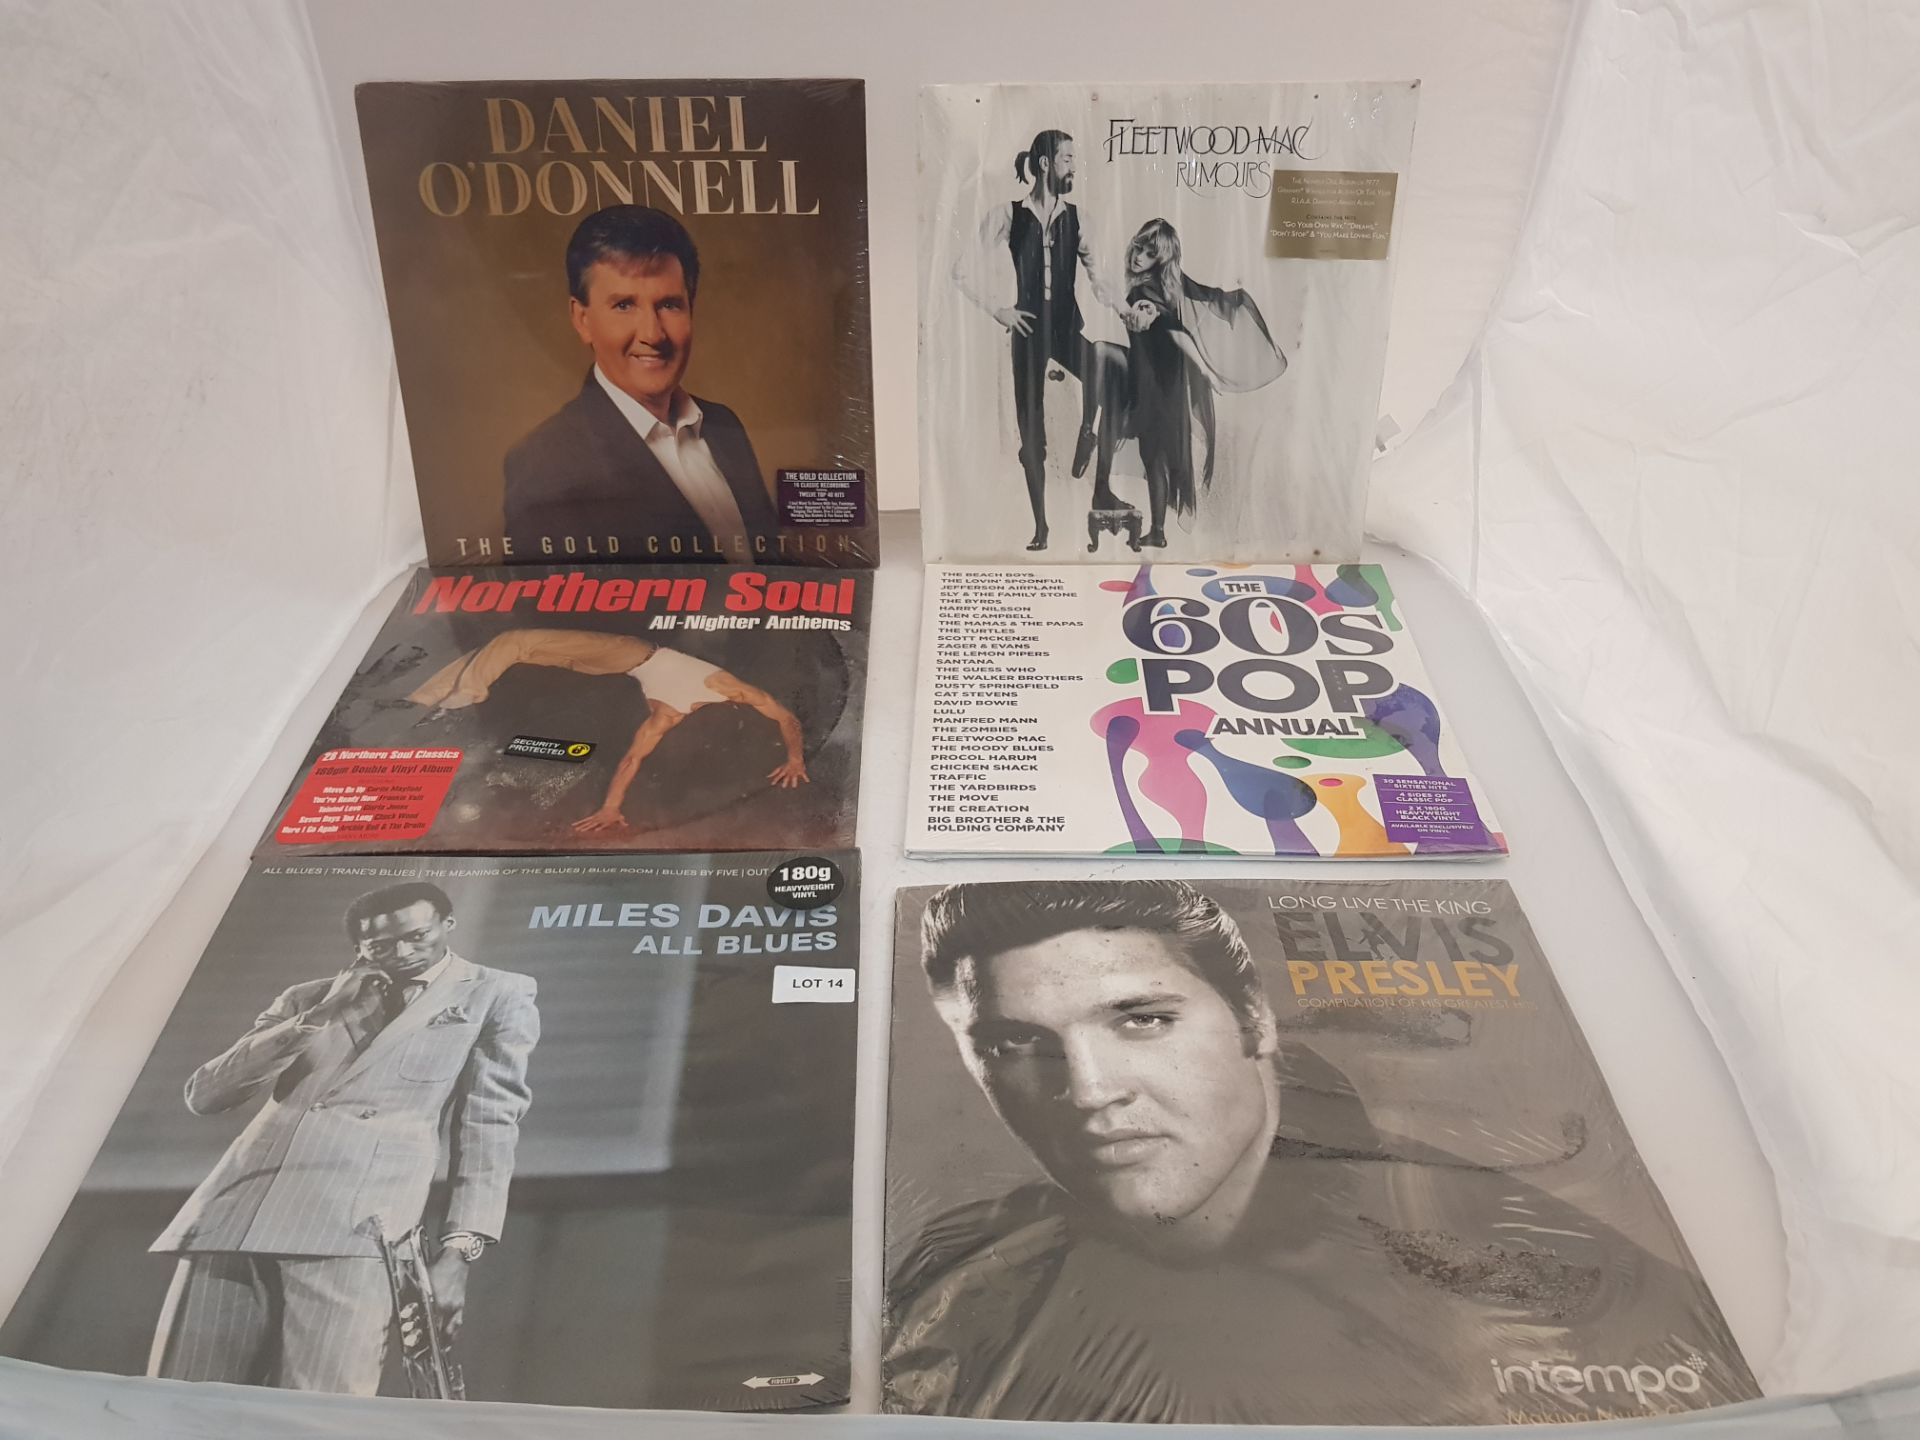 6 x 12" vinyl records to included Daniel O Donnell, Fleetwood mac, The 60s pop annual, Elvis ...